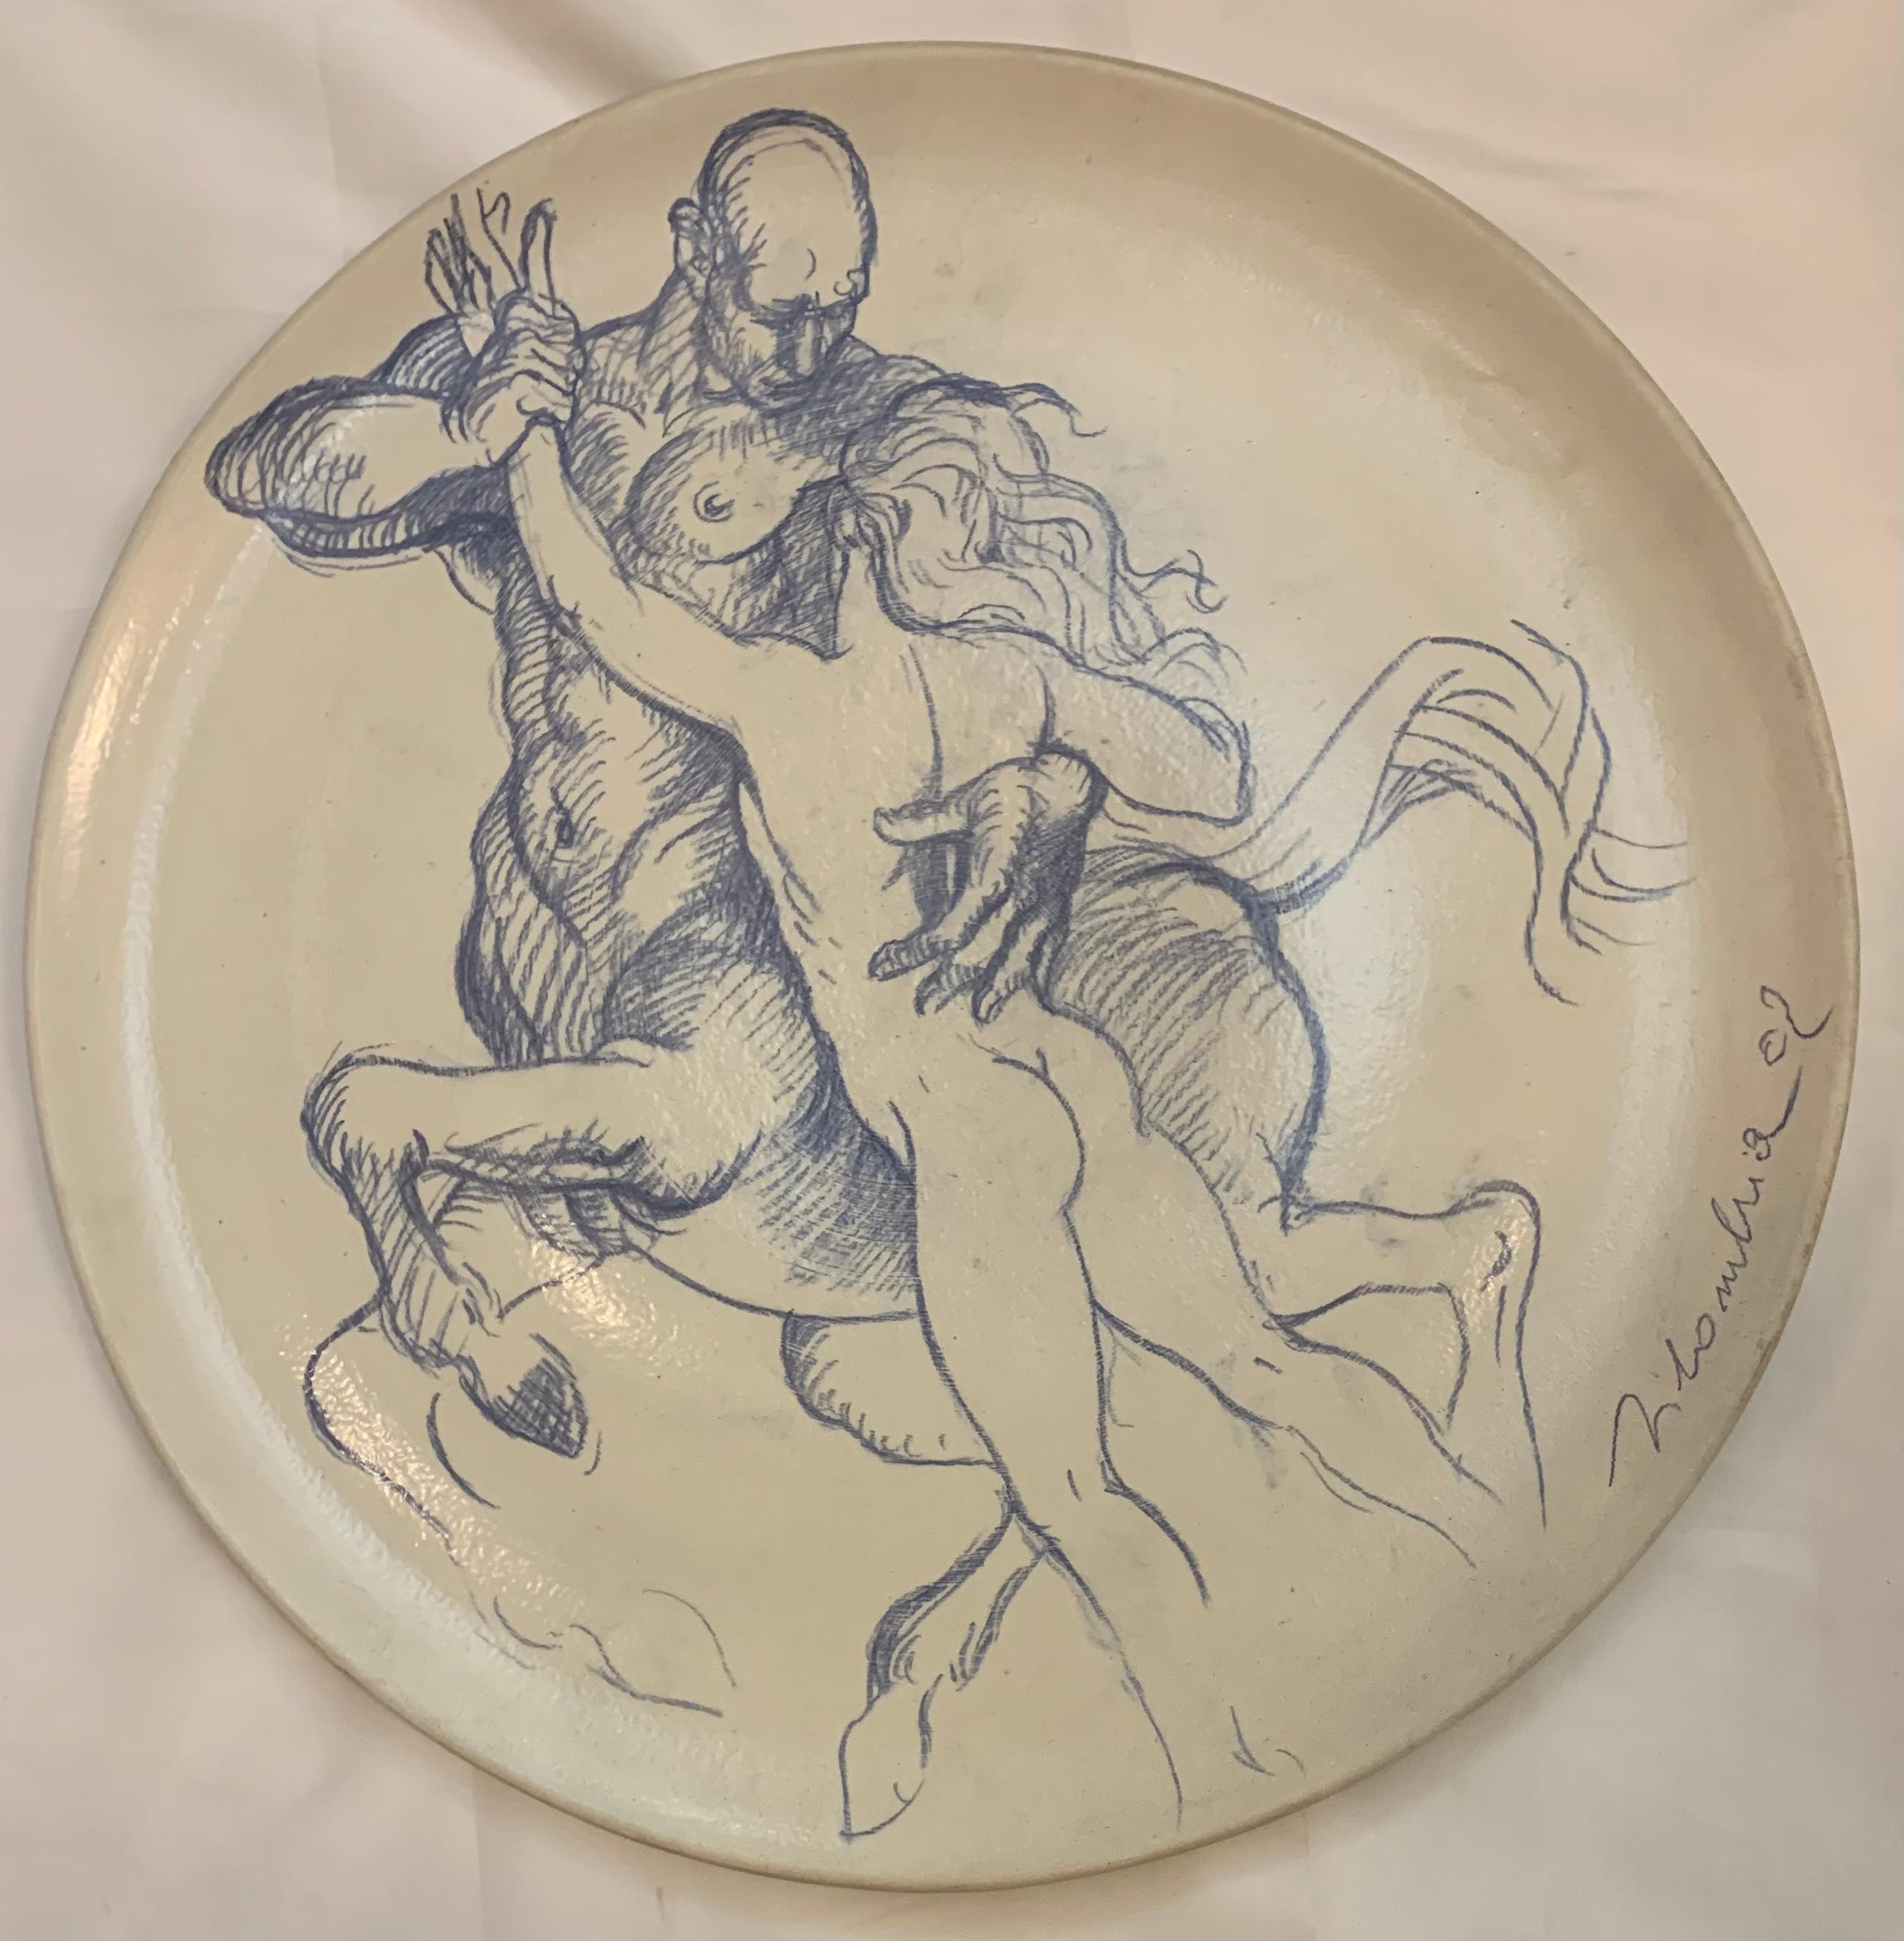 Dancing with Centaur or Achilles and Centaur Chiron.
Hand signed Silombria 2002
Created in 2002. Unique piece.
Ceramic, Made in Albissola ( Savona), atelier Ernan.
Unique hand painted large charger , 50 cm (approximately 20 inch).
Created by Italian